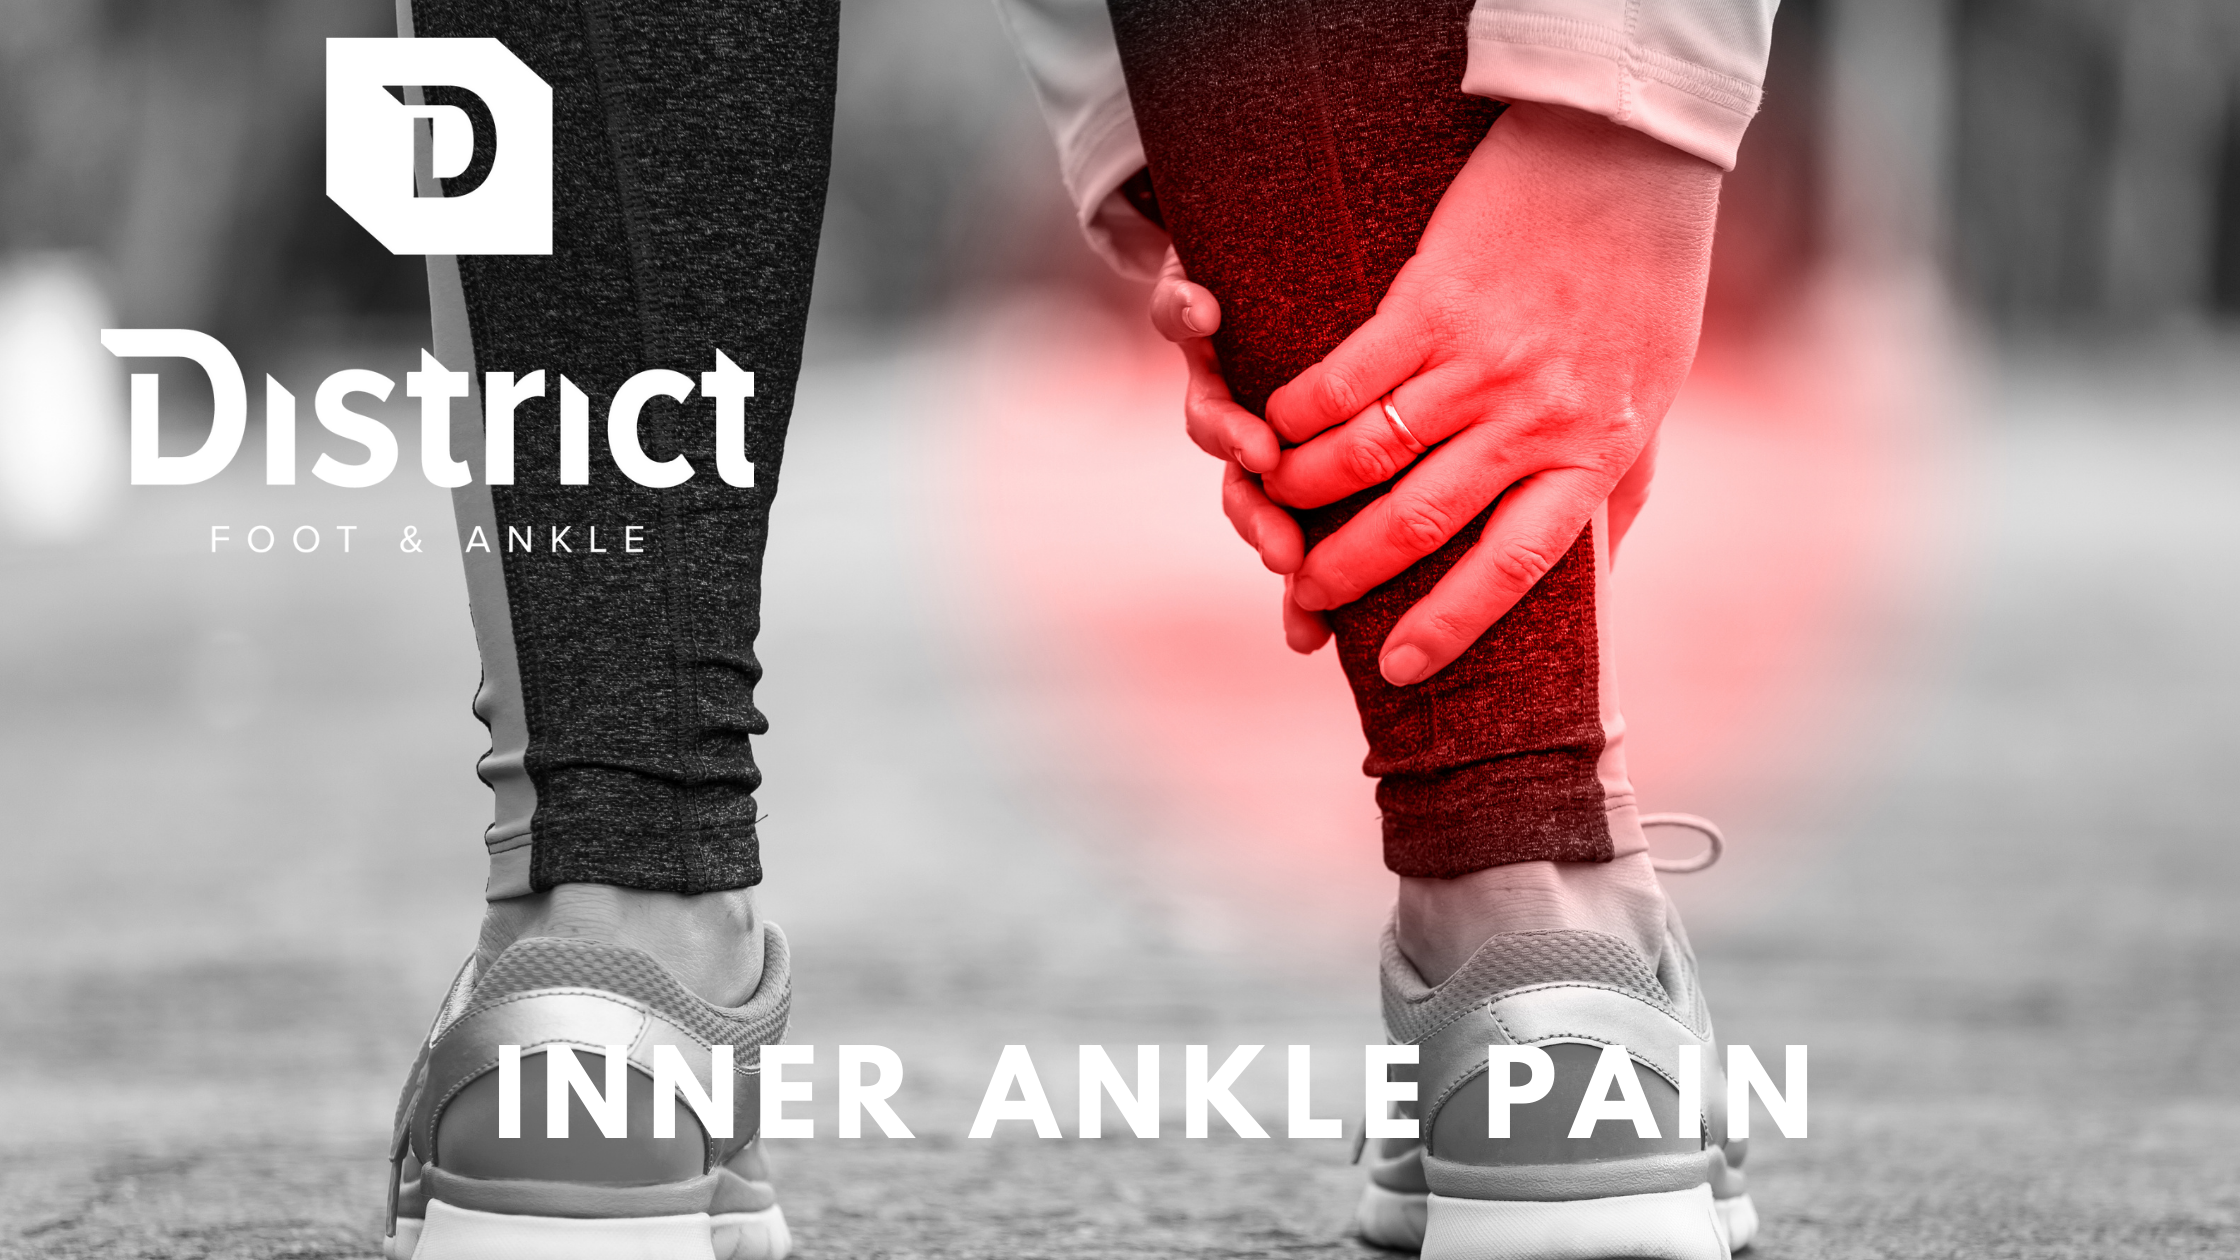 Inner ankle pain has many causes